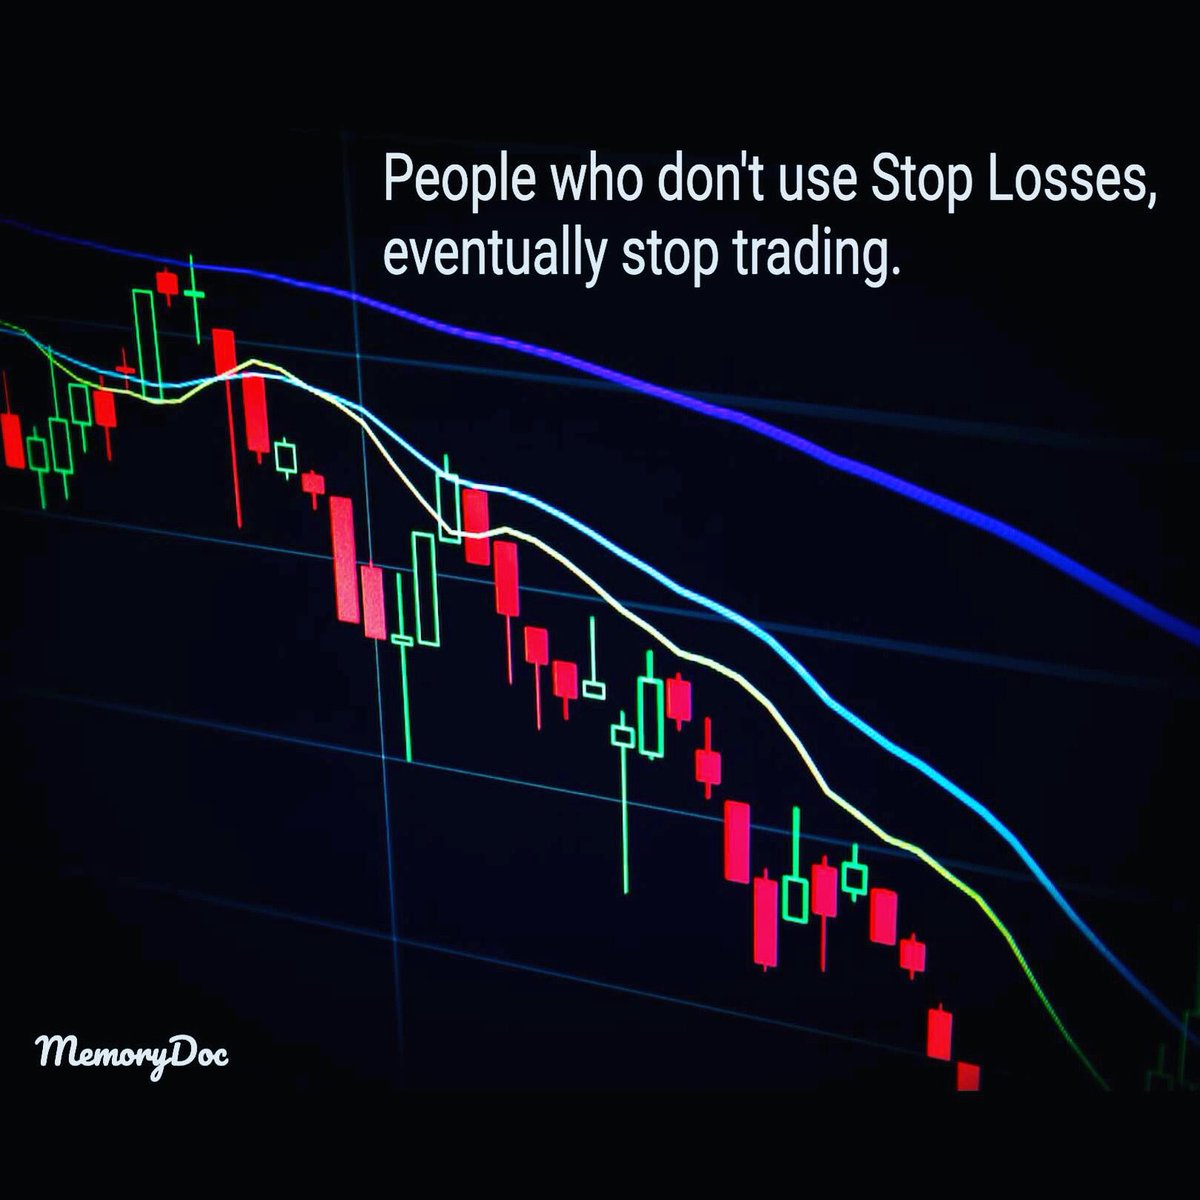 In the trading world, safety nets matter. 📊💡 Using stop losses is like having a financial guardian angel on your side. 🙌💰 Don't gamble with your hard-earned money; trade wisely. 🚀📈 #TradeSmart #StopLossSaves #FinancialGuardian #TradingWisdom